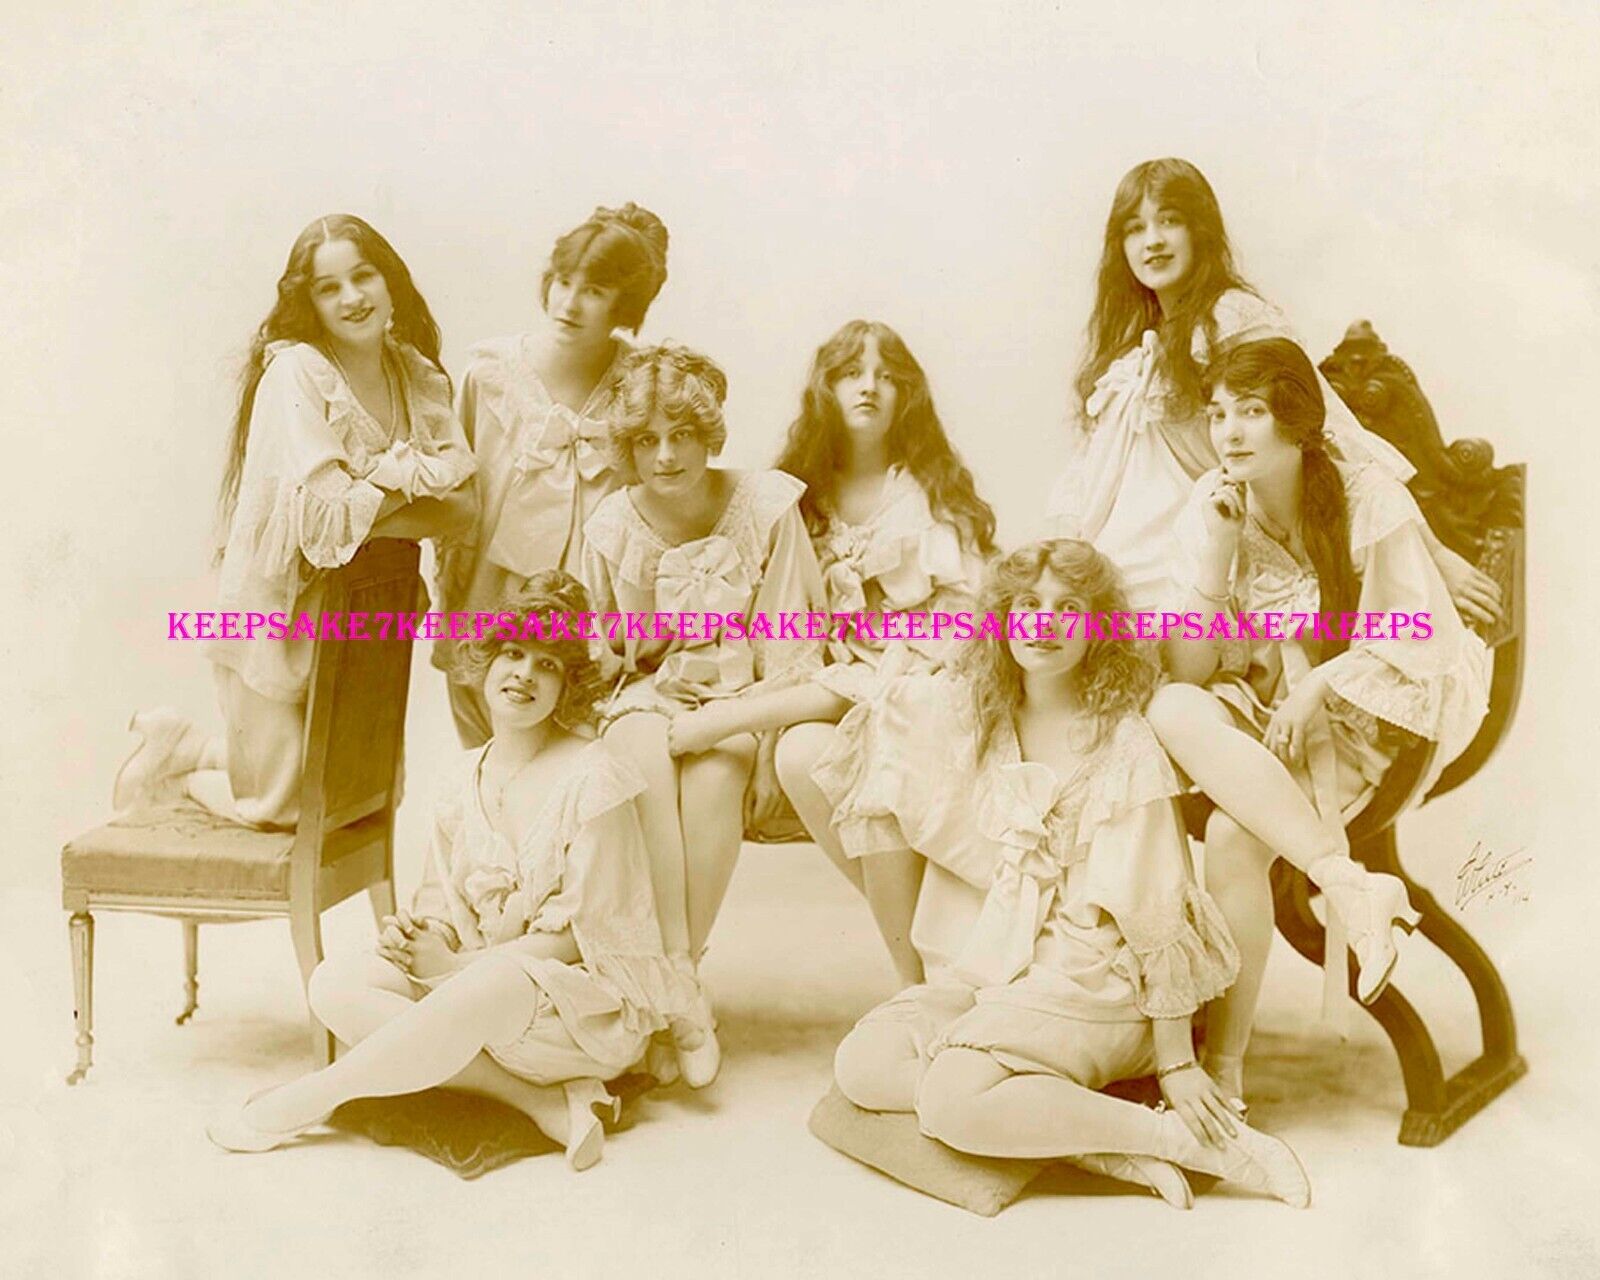 WONDERFUL 1914 PHOTO OF YOUNG STAGE ACTRESSES IN FRILLY LACE NIGHTGOWNS A-1914